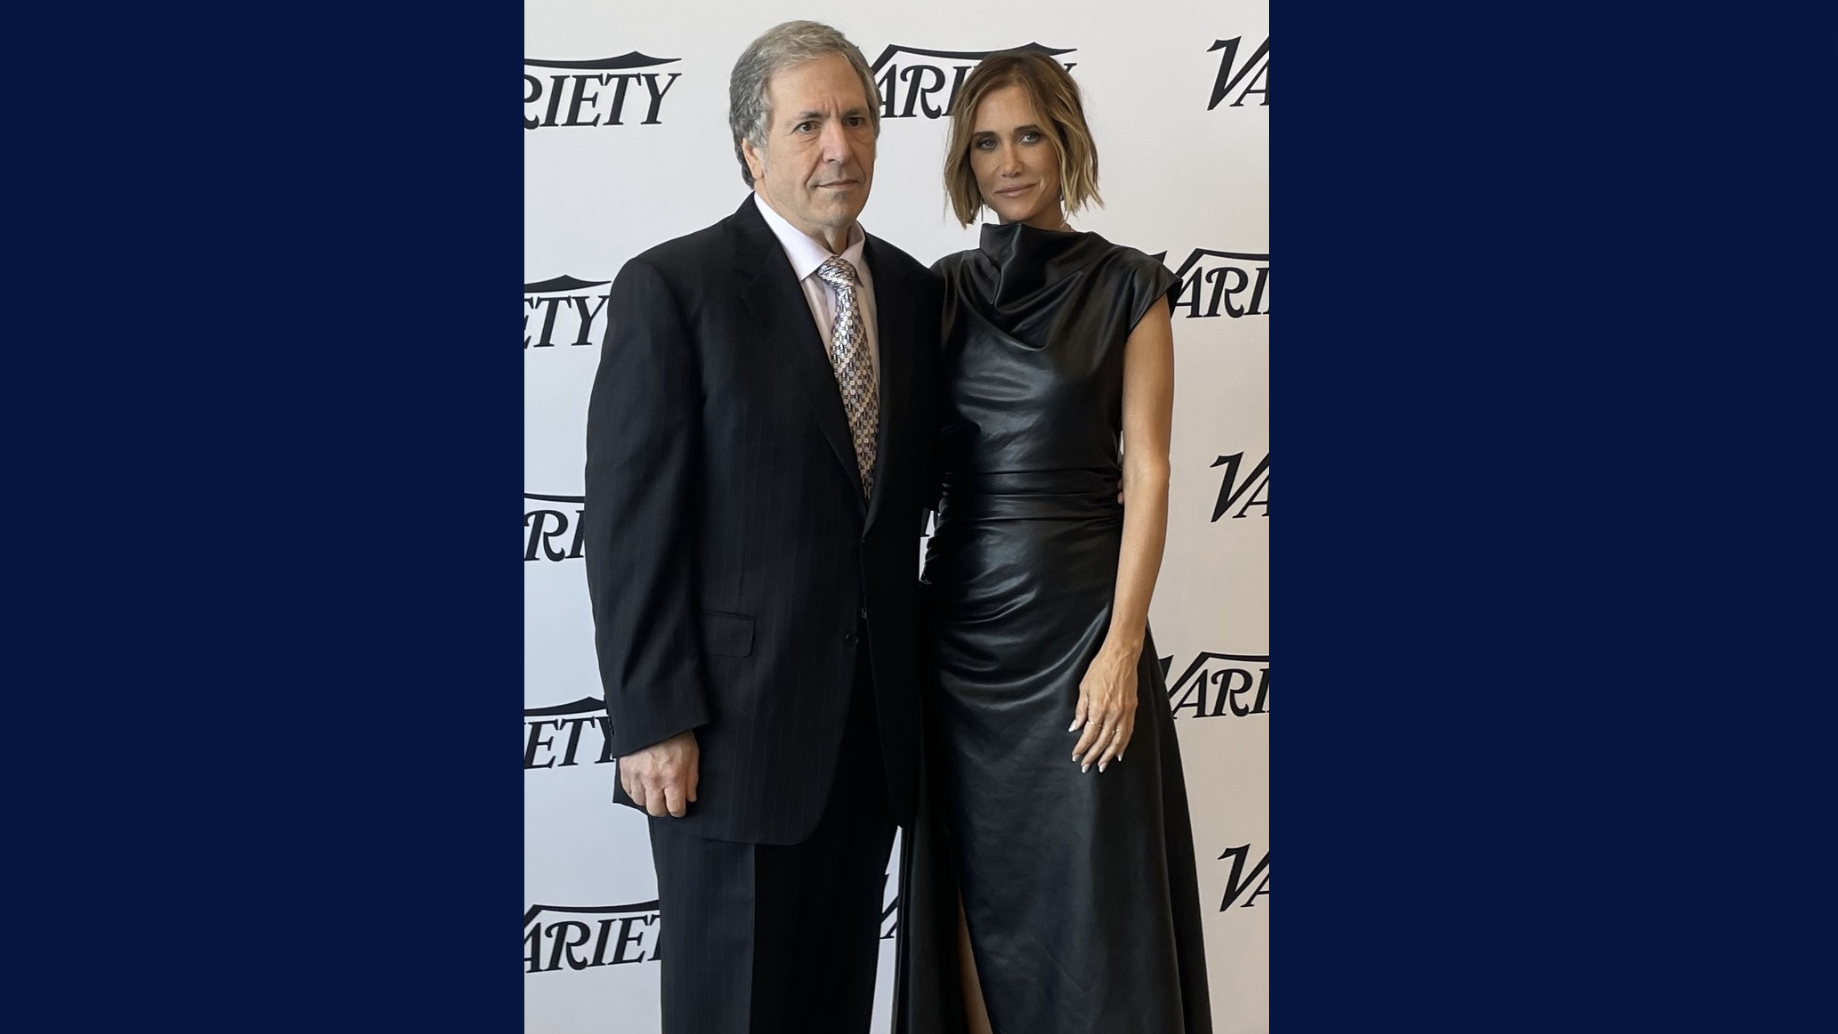 Dr. S. Robert Levine Presents Variety Mary Tyler Moore Visionary Award to Kristen Wiig